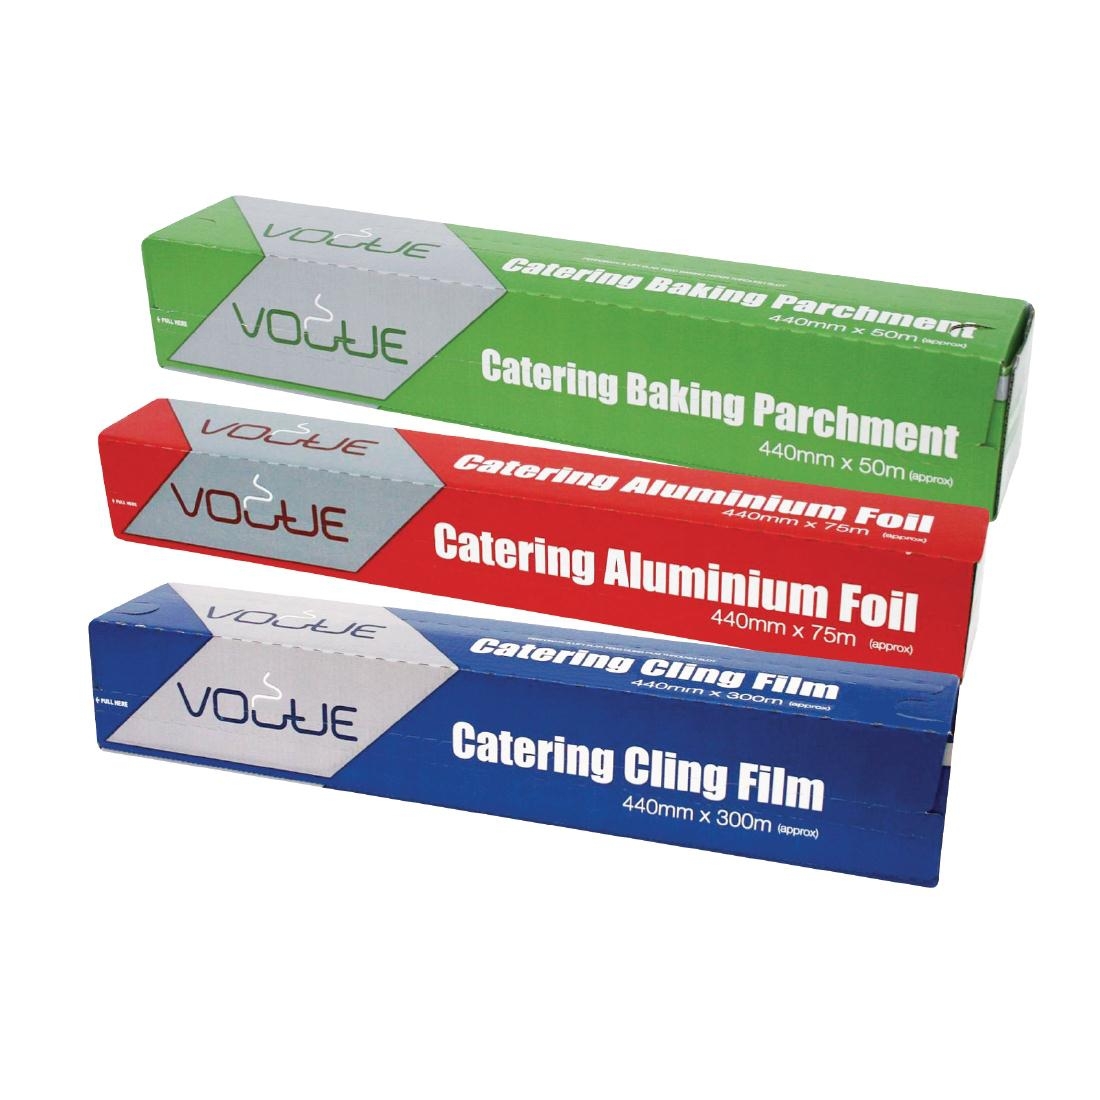 Vogue Professional Catering Pack (440mm)